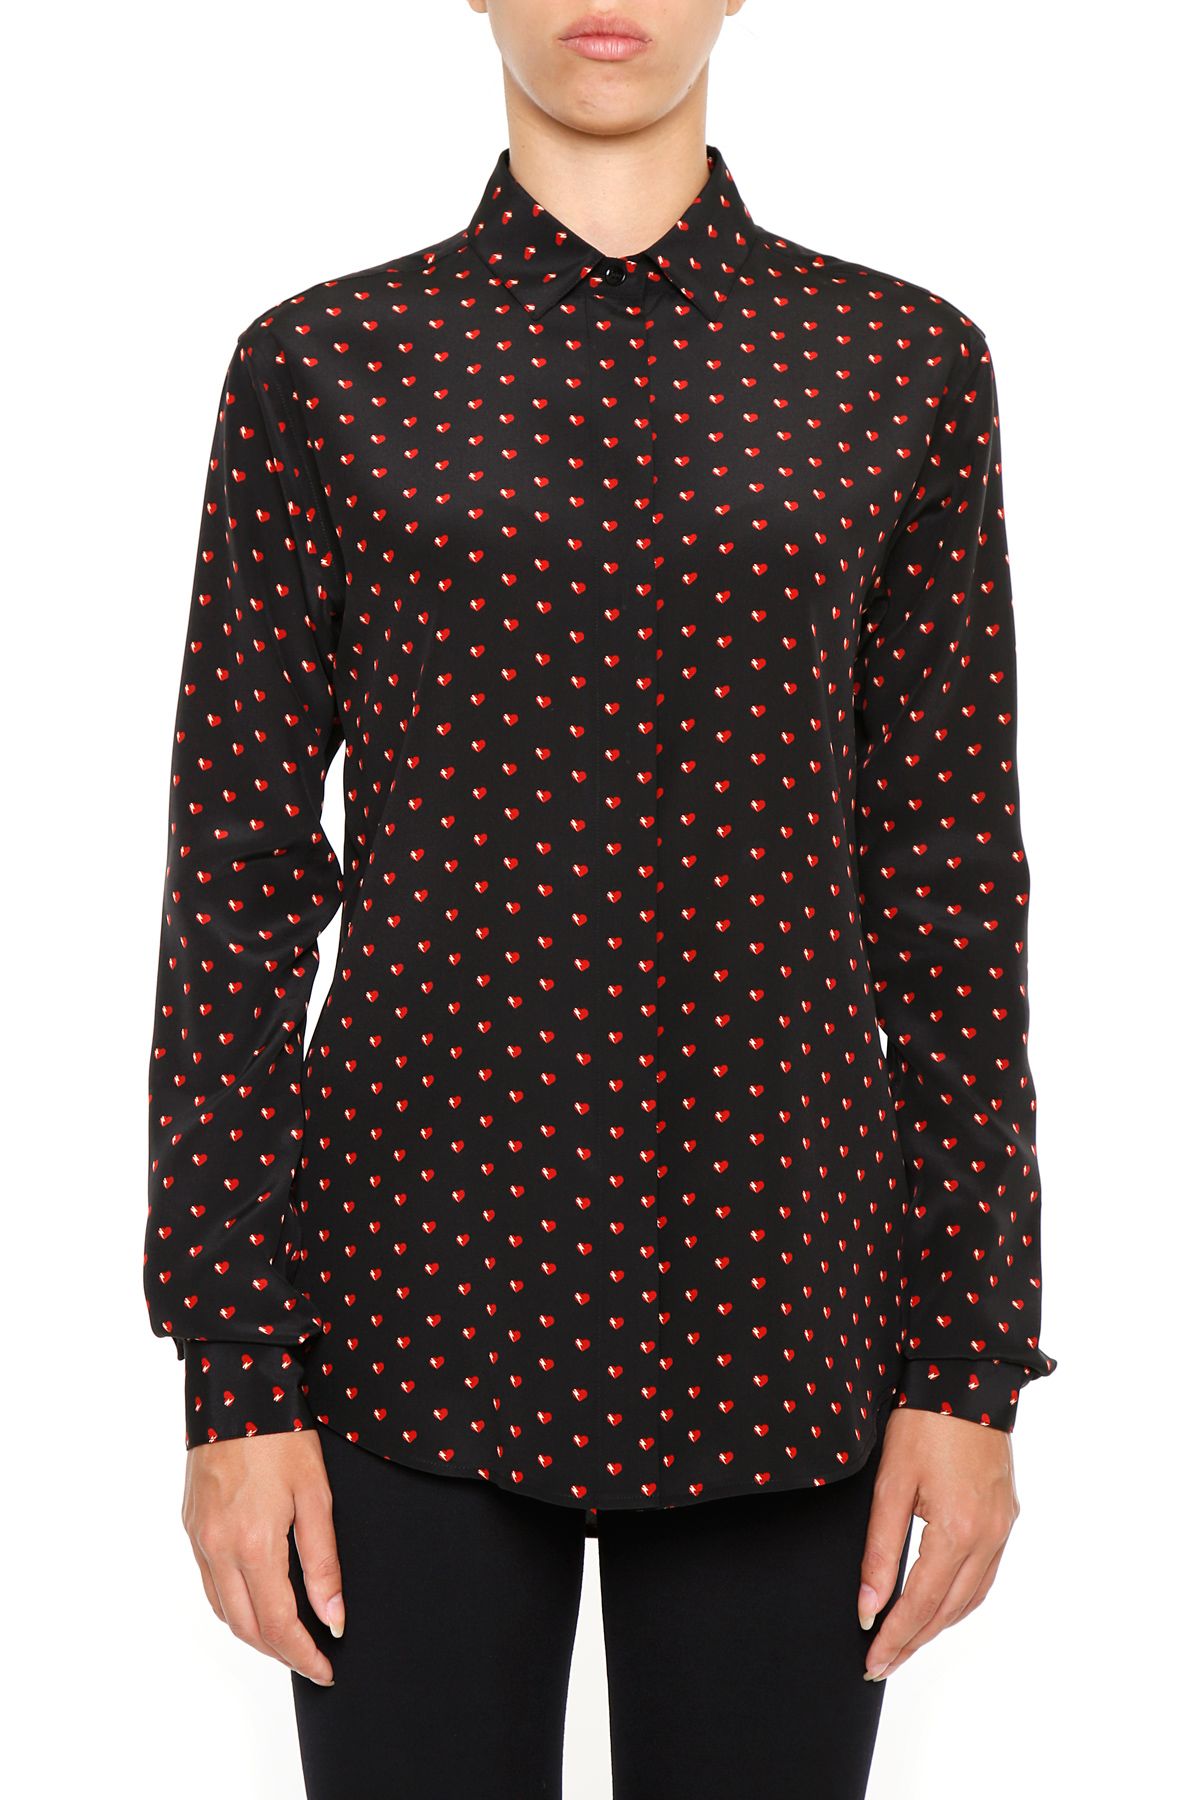 Saint Laurent Classic Shirt In Black And Red Micro Heart And Lightening ...